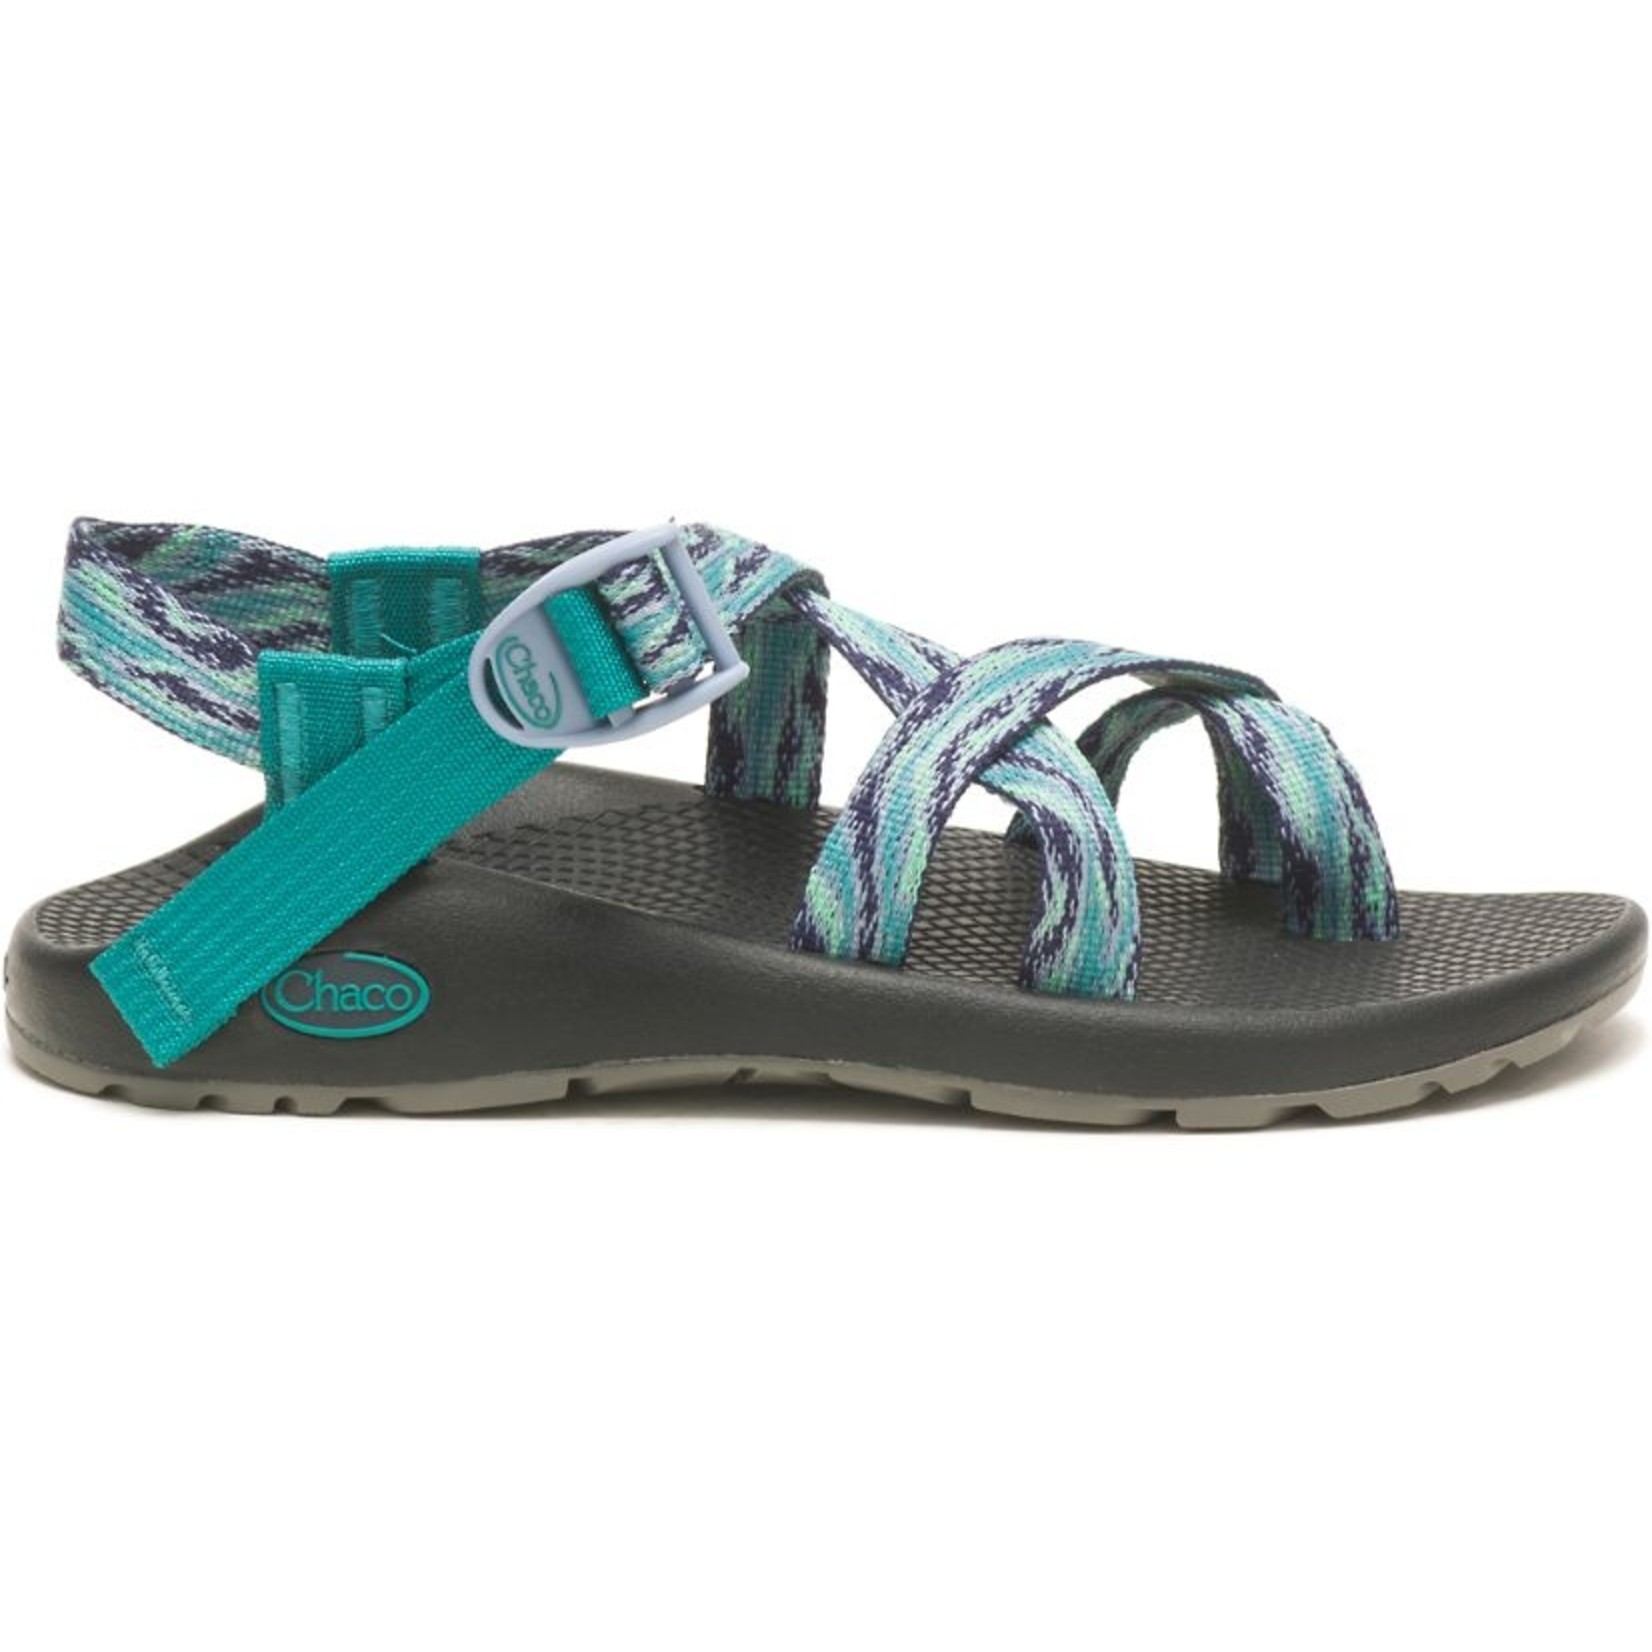 Are Chacos Good for Hiking? - Chaco Sandal Review · Anna Tee